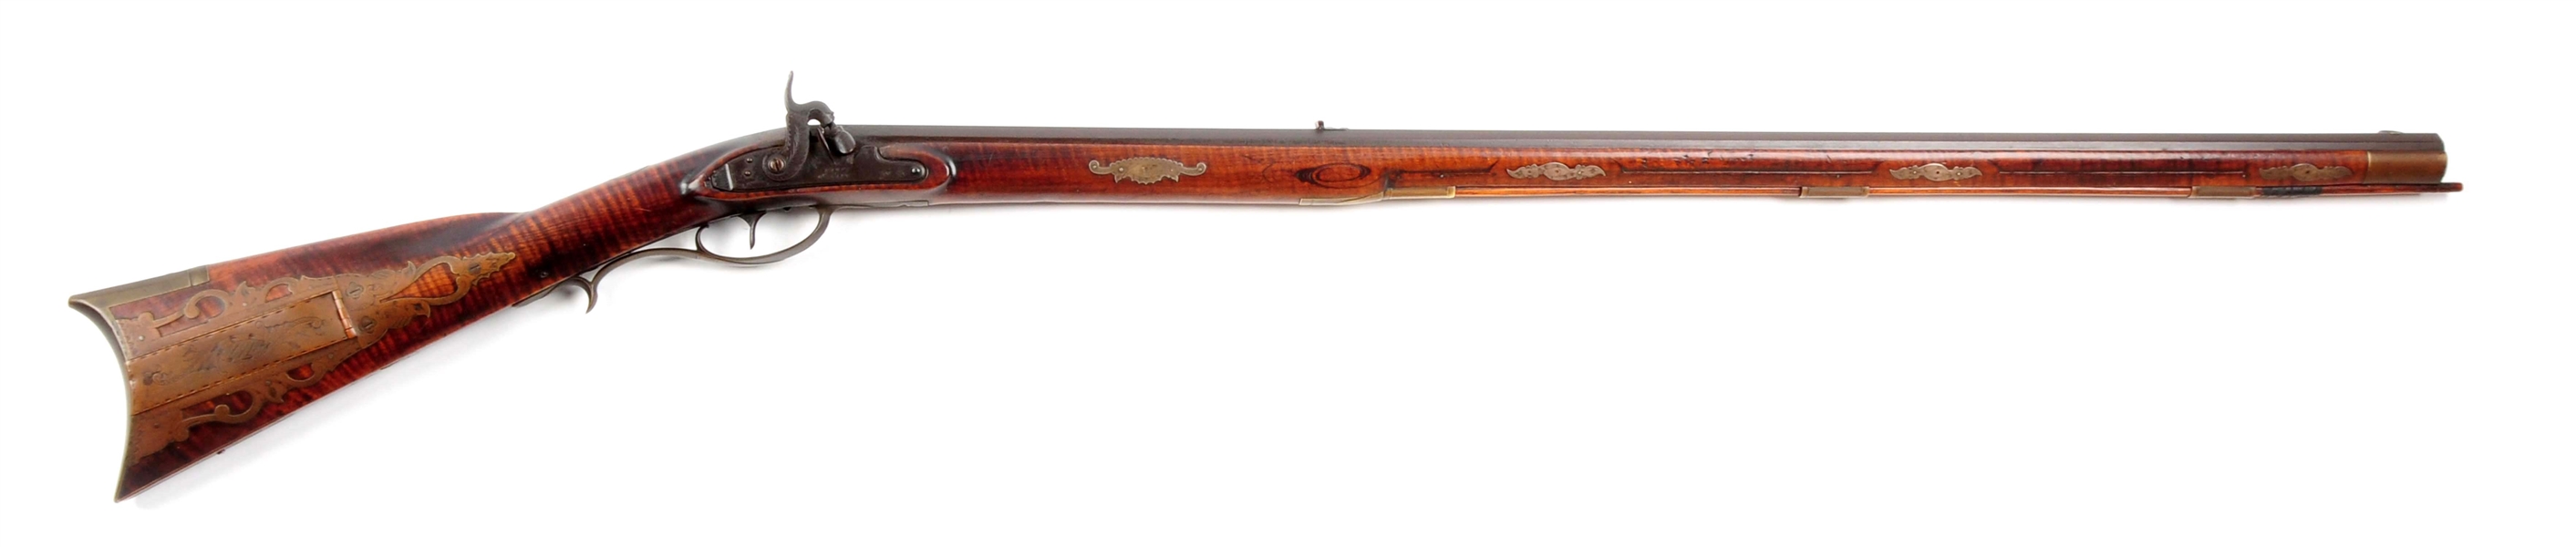 (A) PERCUSSION FULL STOCK KENTUCKY LONGRIFLE BY J. WALKER WITH HORN